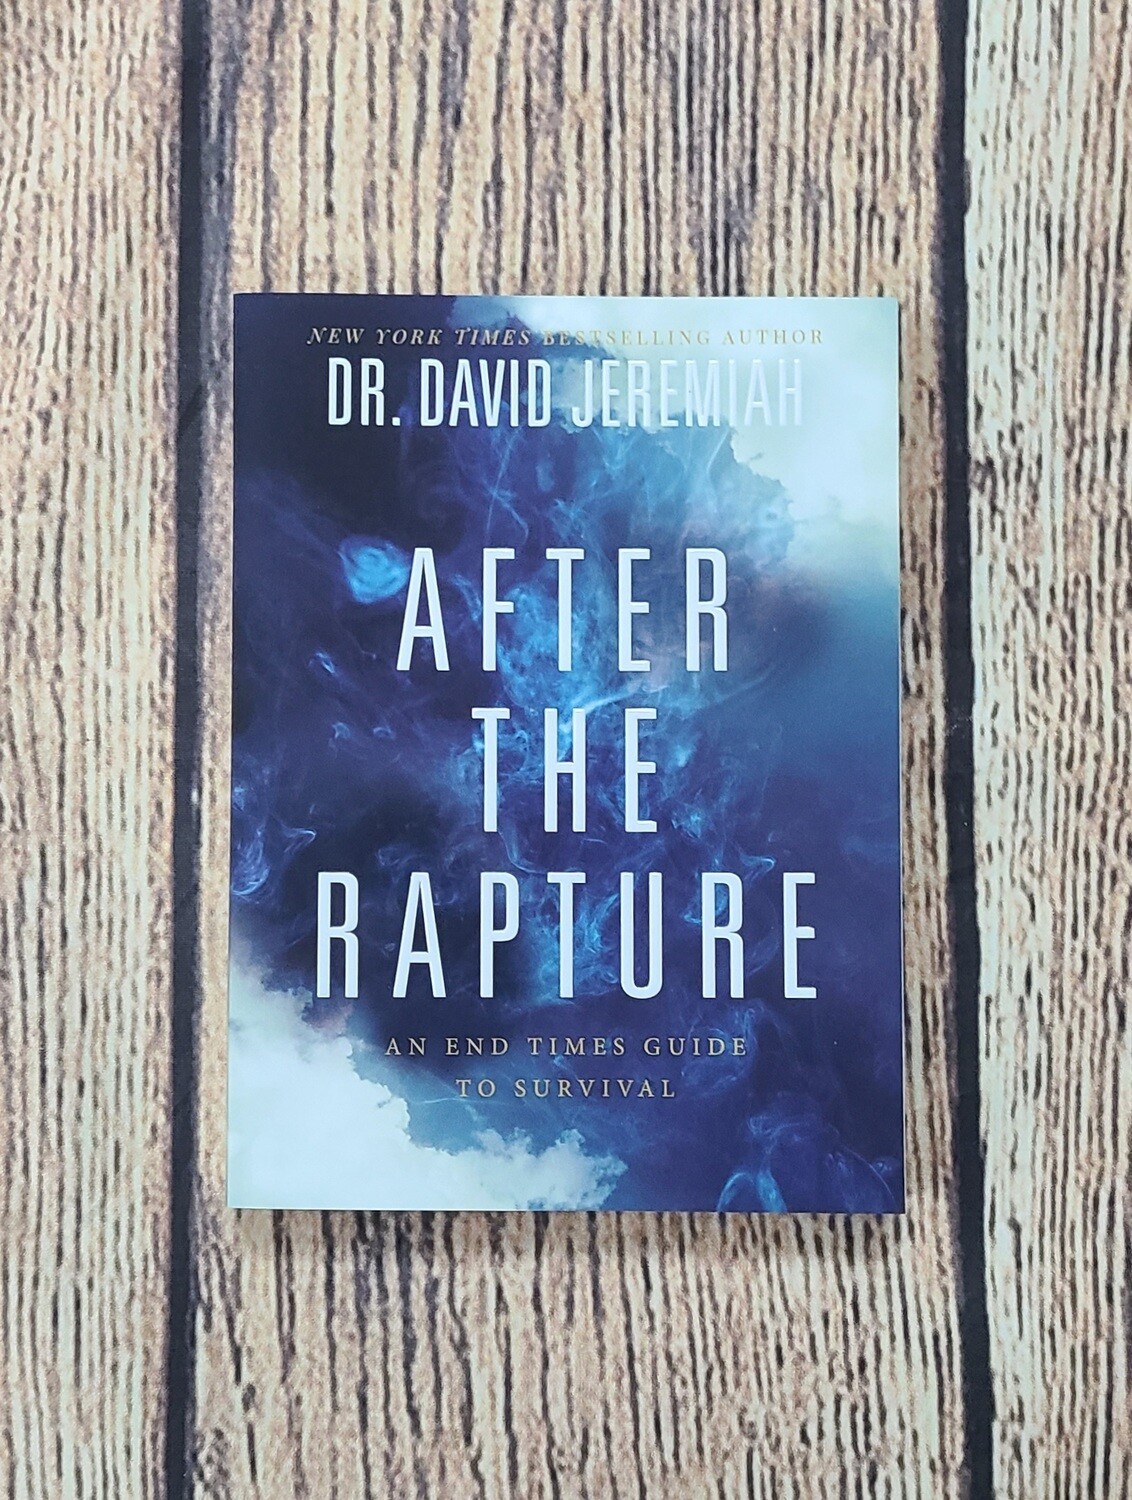 After the Rapture: An End Times Guide to Survival by Dr. David Jeremiah - New